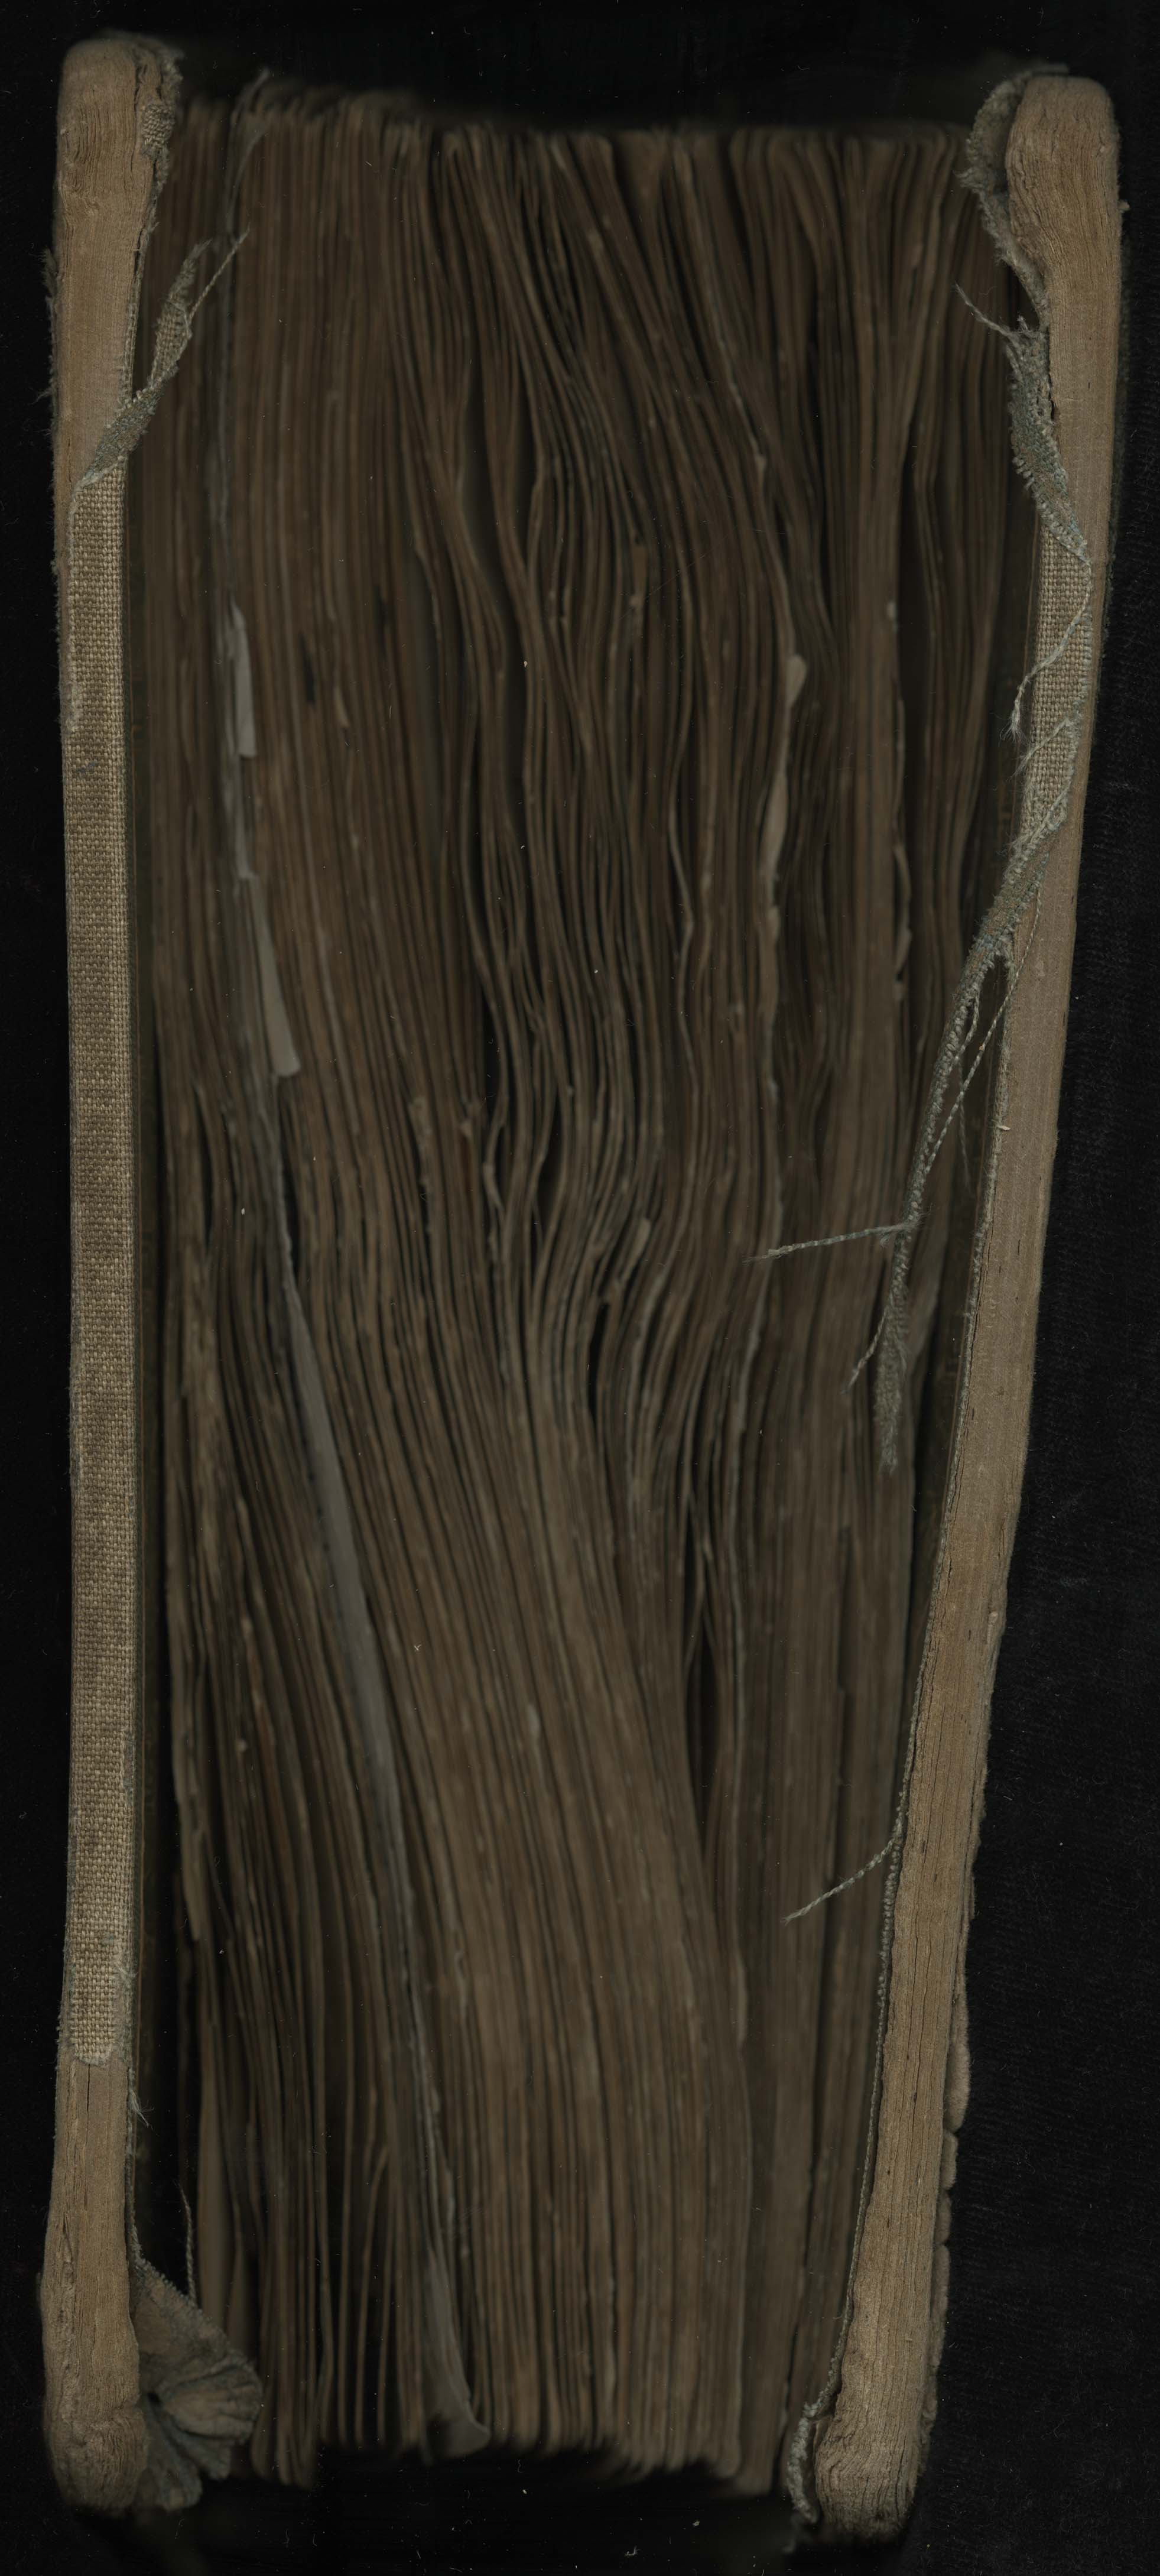 View of damaged book with warped pages.